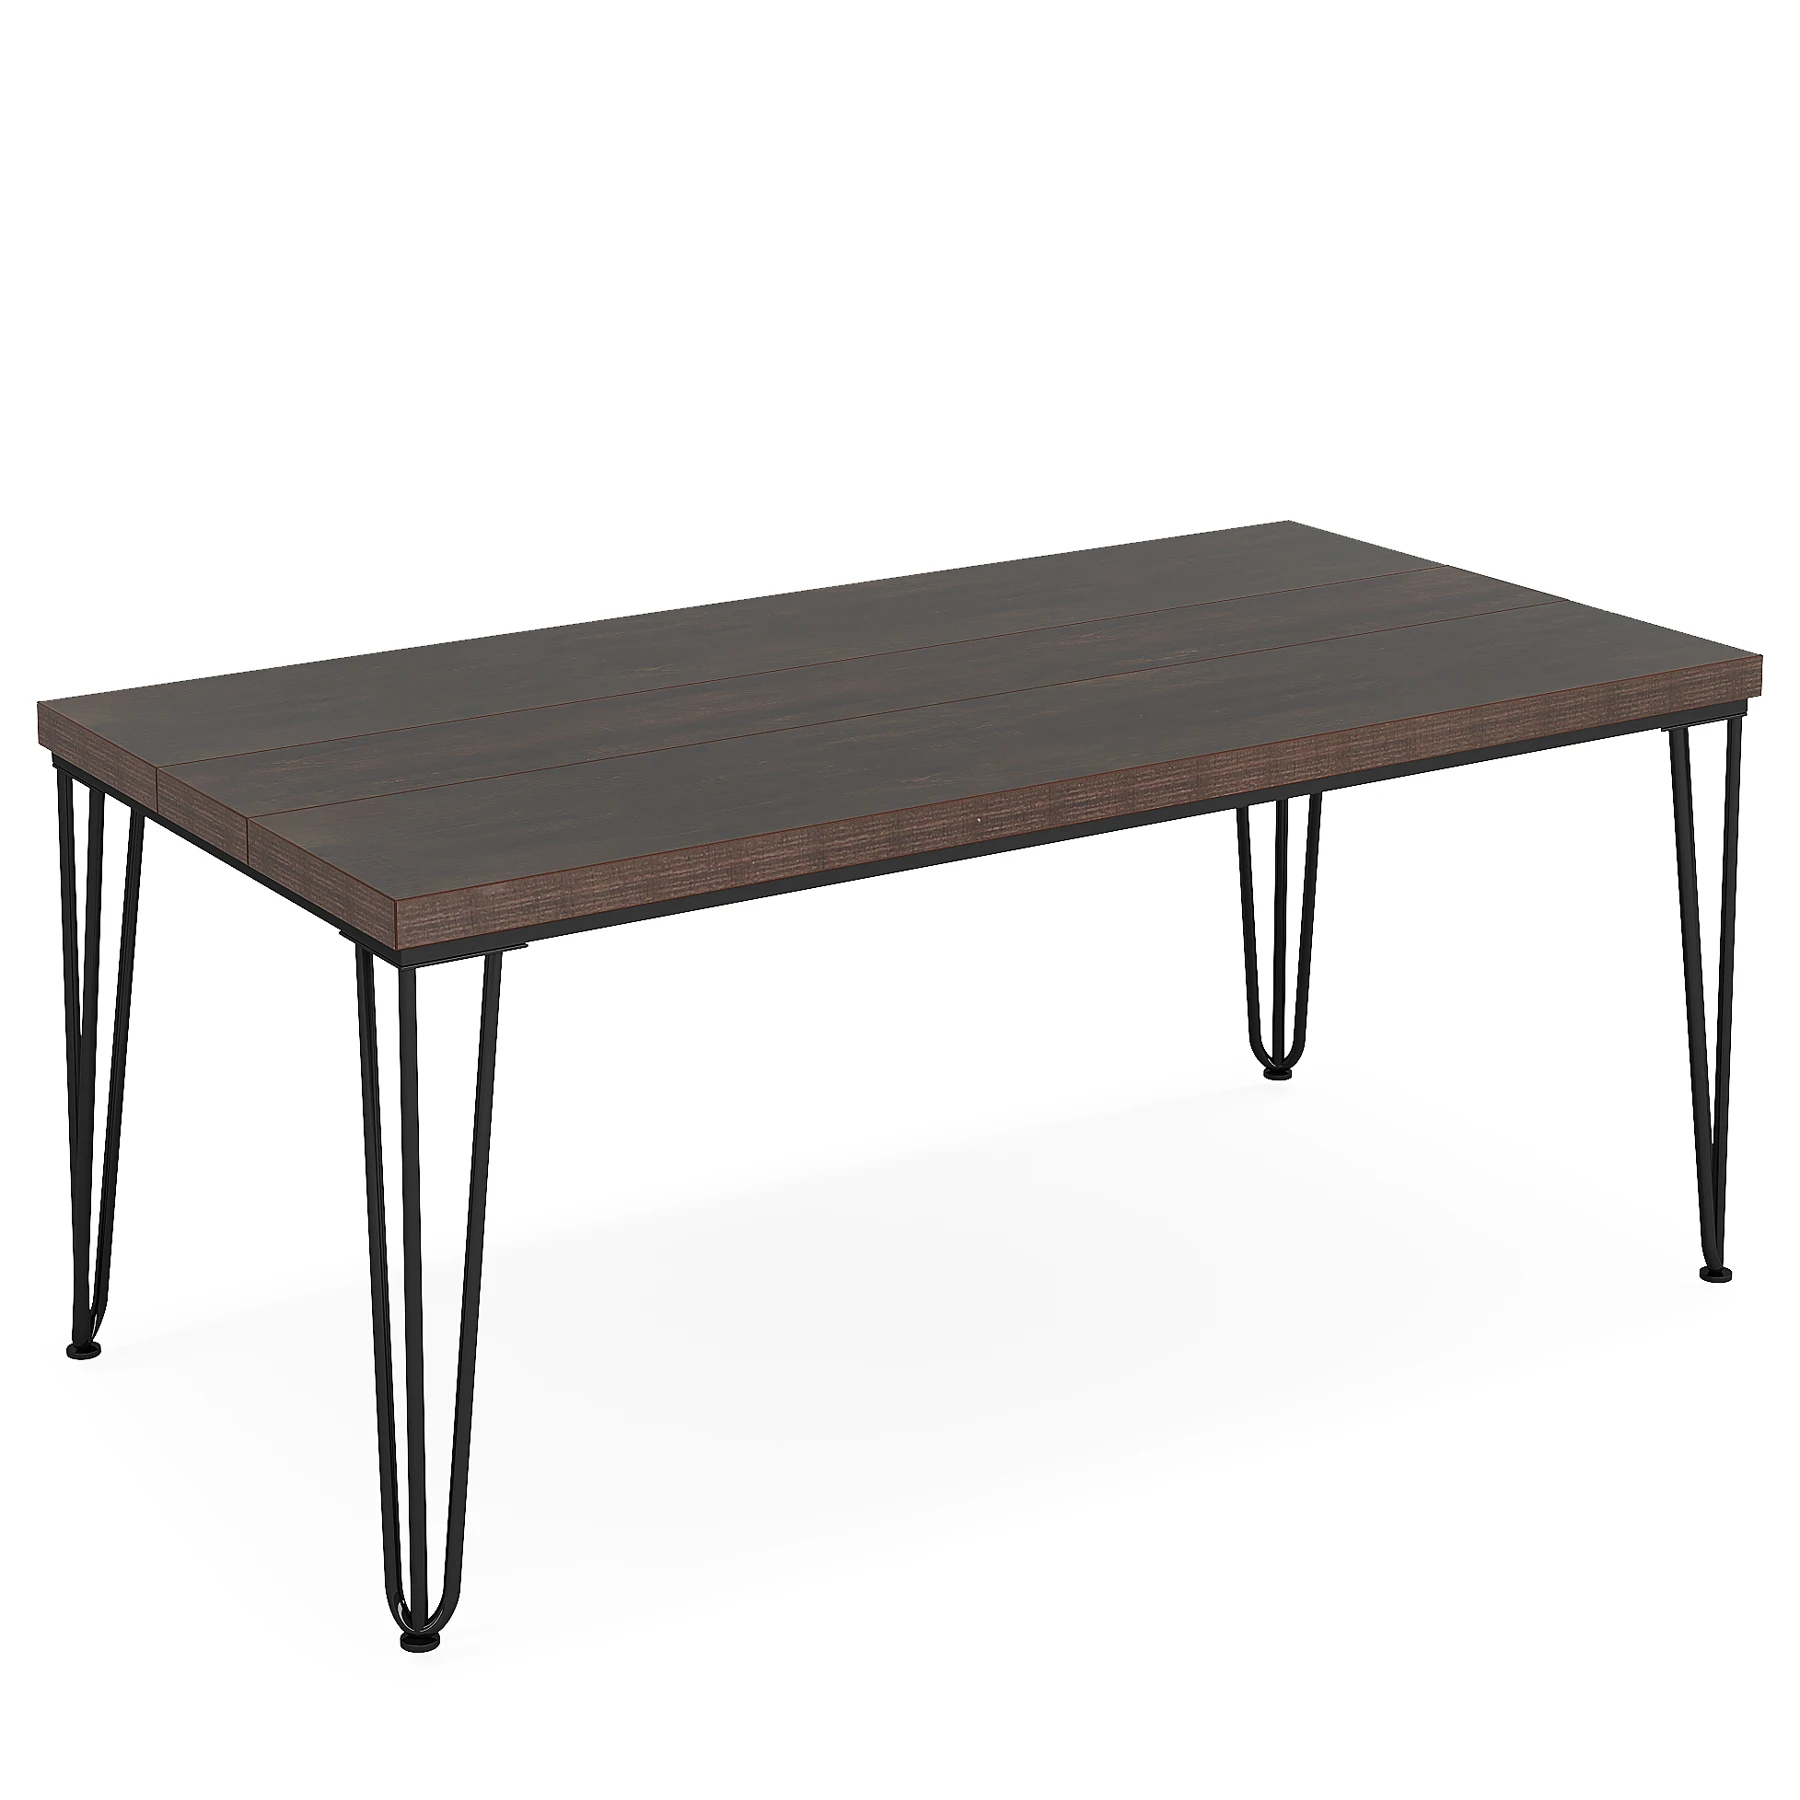 Tribesigns new style dining room furniture modern simple wood metal brown dining table for 6 people